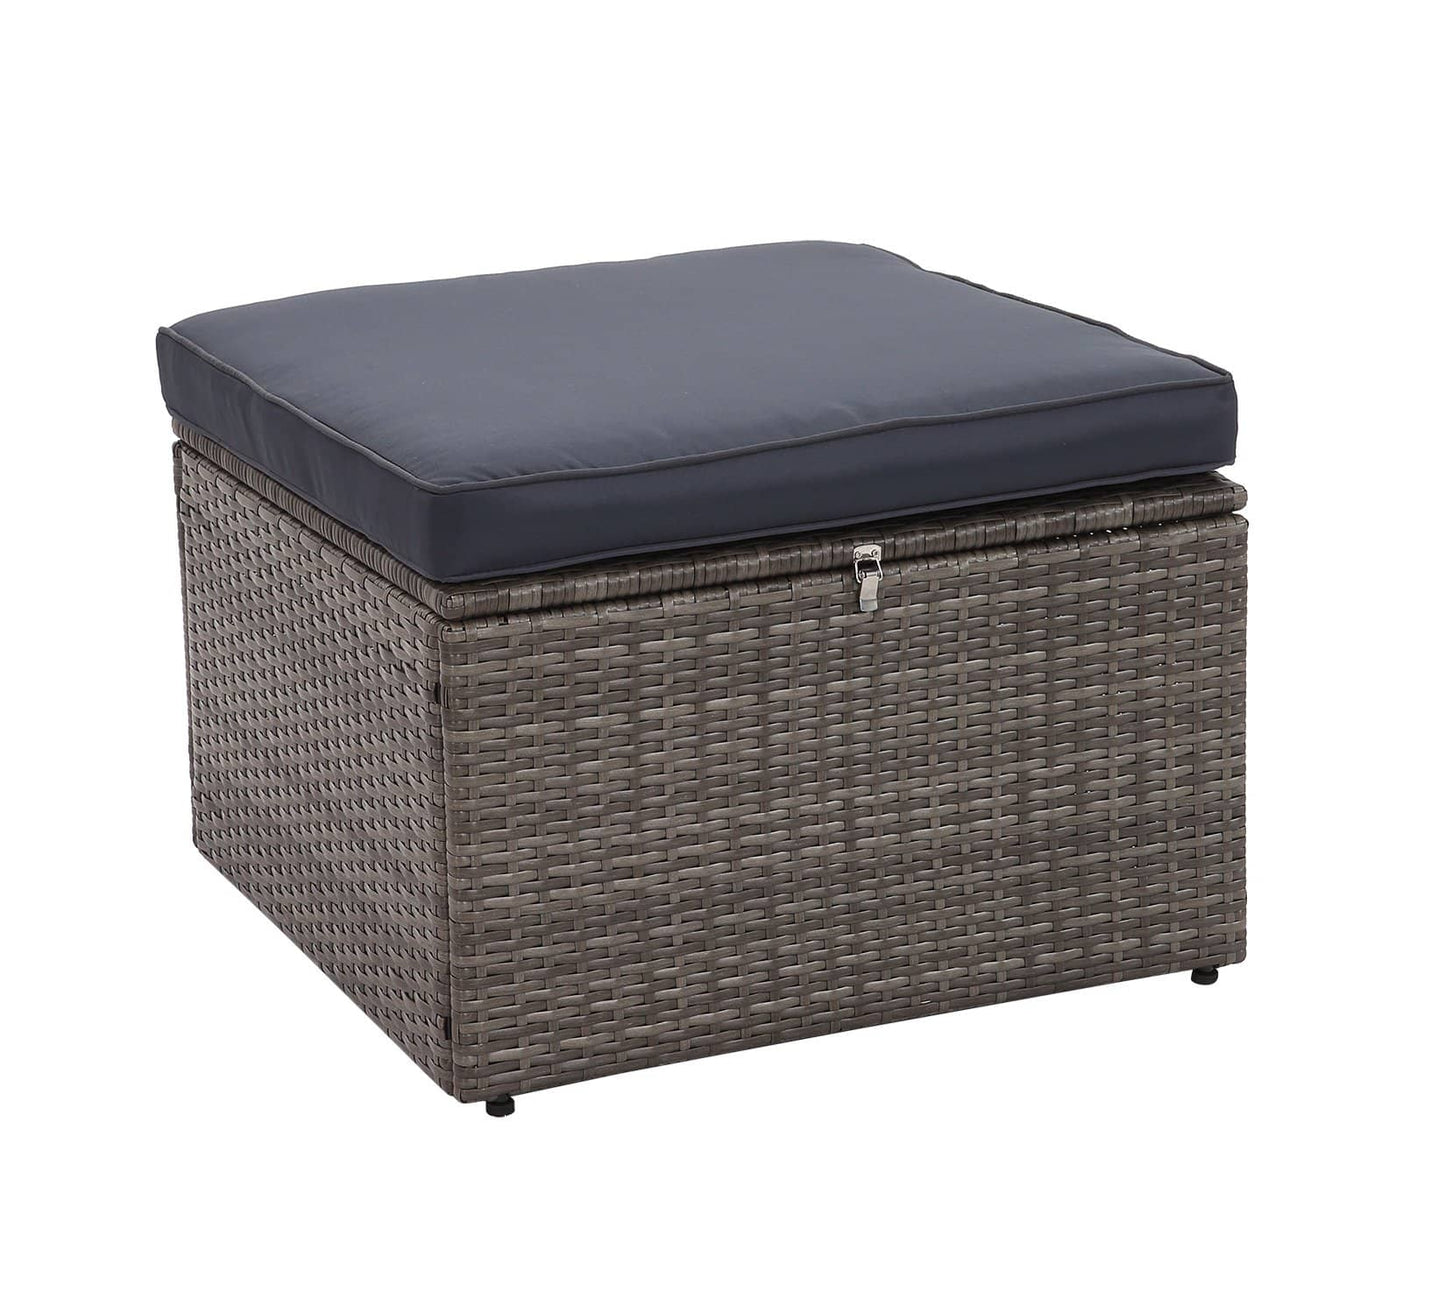 Context Brisk 6 Piece All Weather Wicker Sofa Seating Group with Cushions, Ottoman with Storage and Coffee Table - Navy